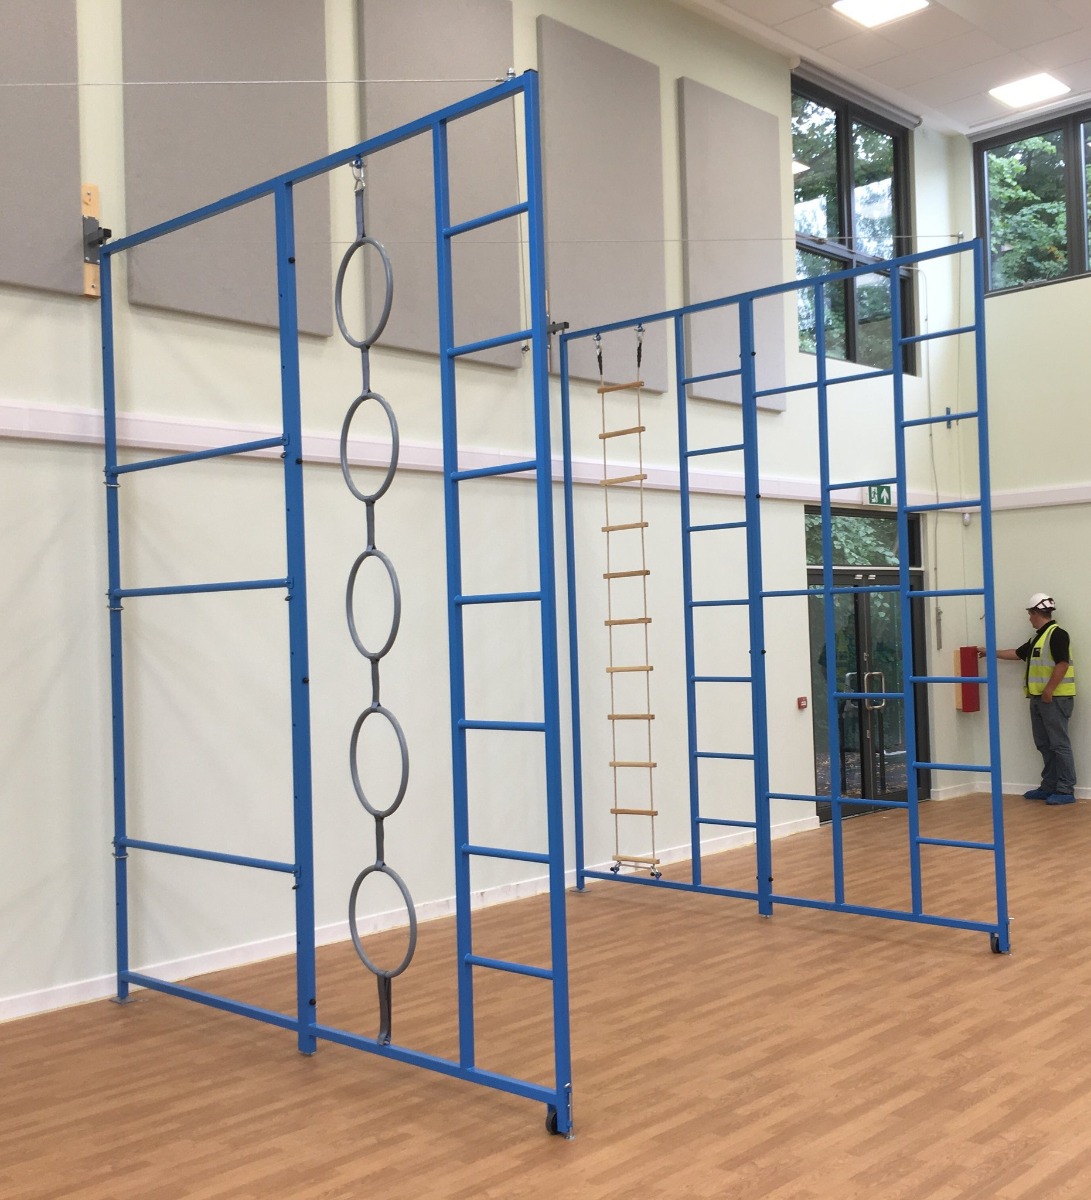 Two-in-One steel wall hinged climbing frame